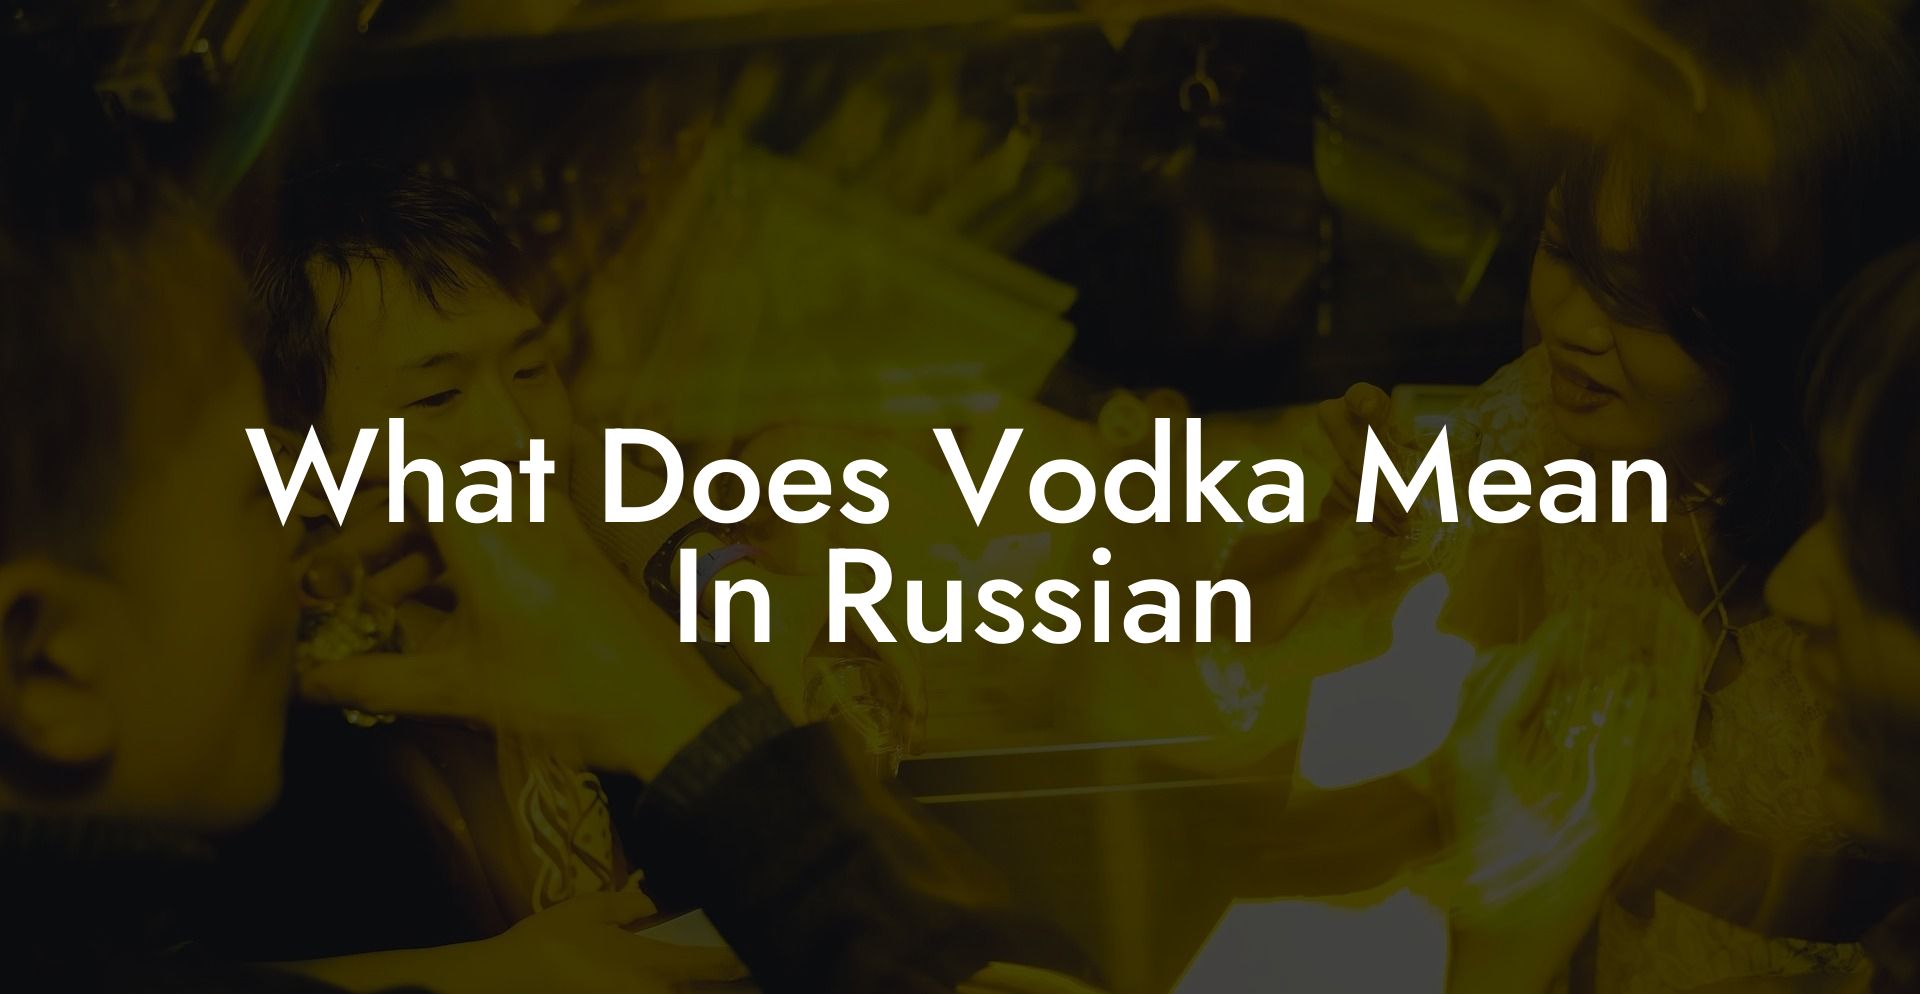 What Does Vodka Mean In Russian